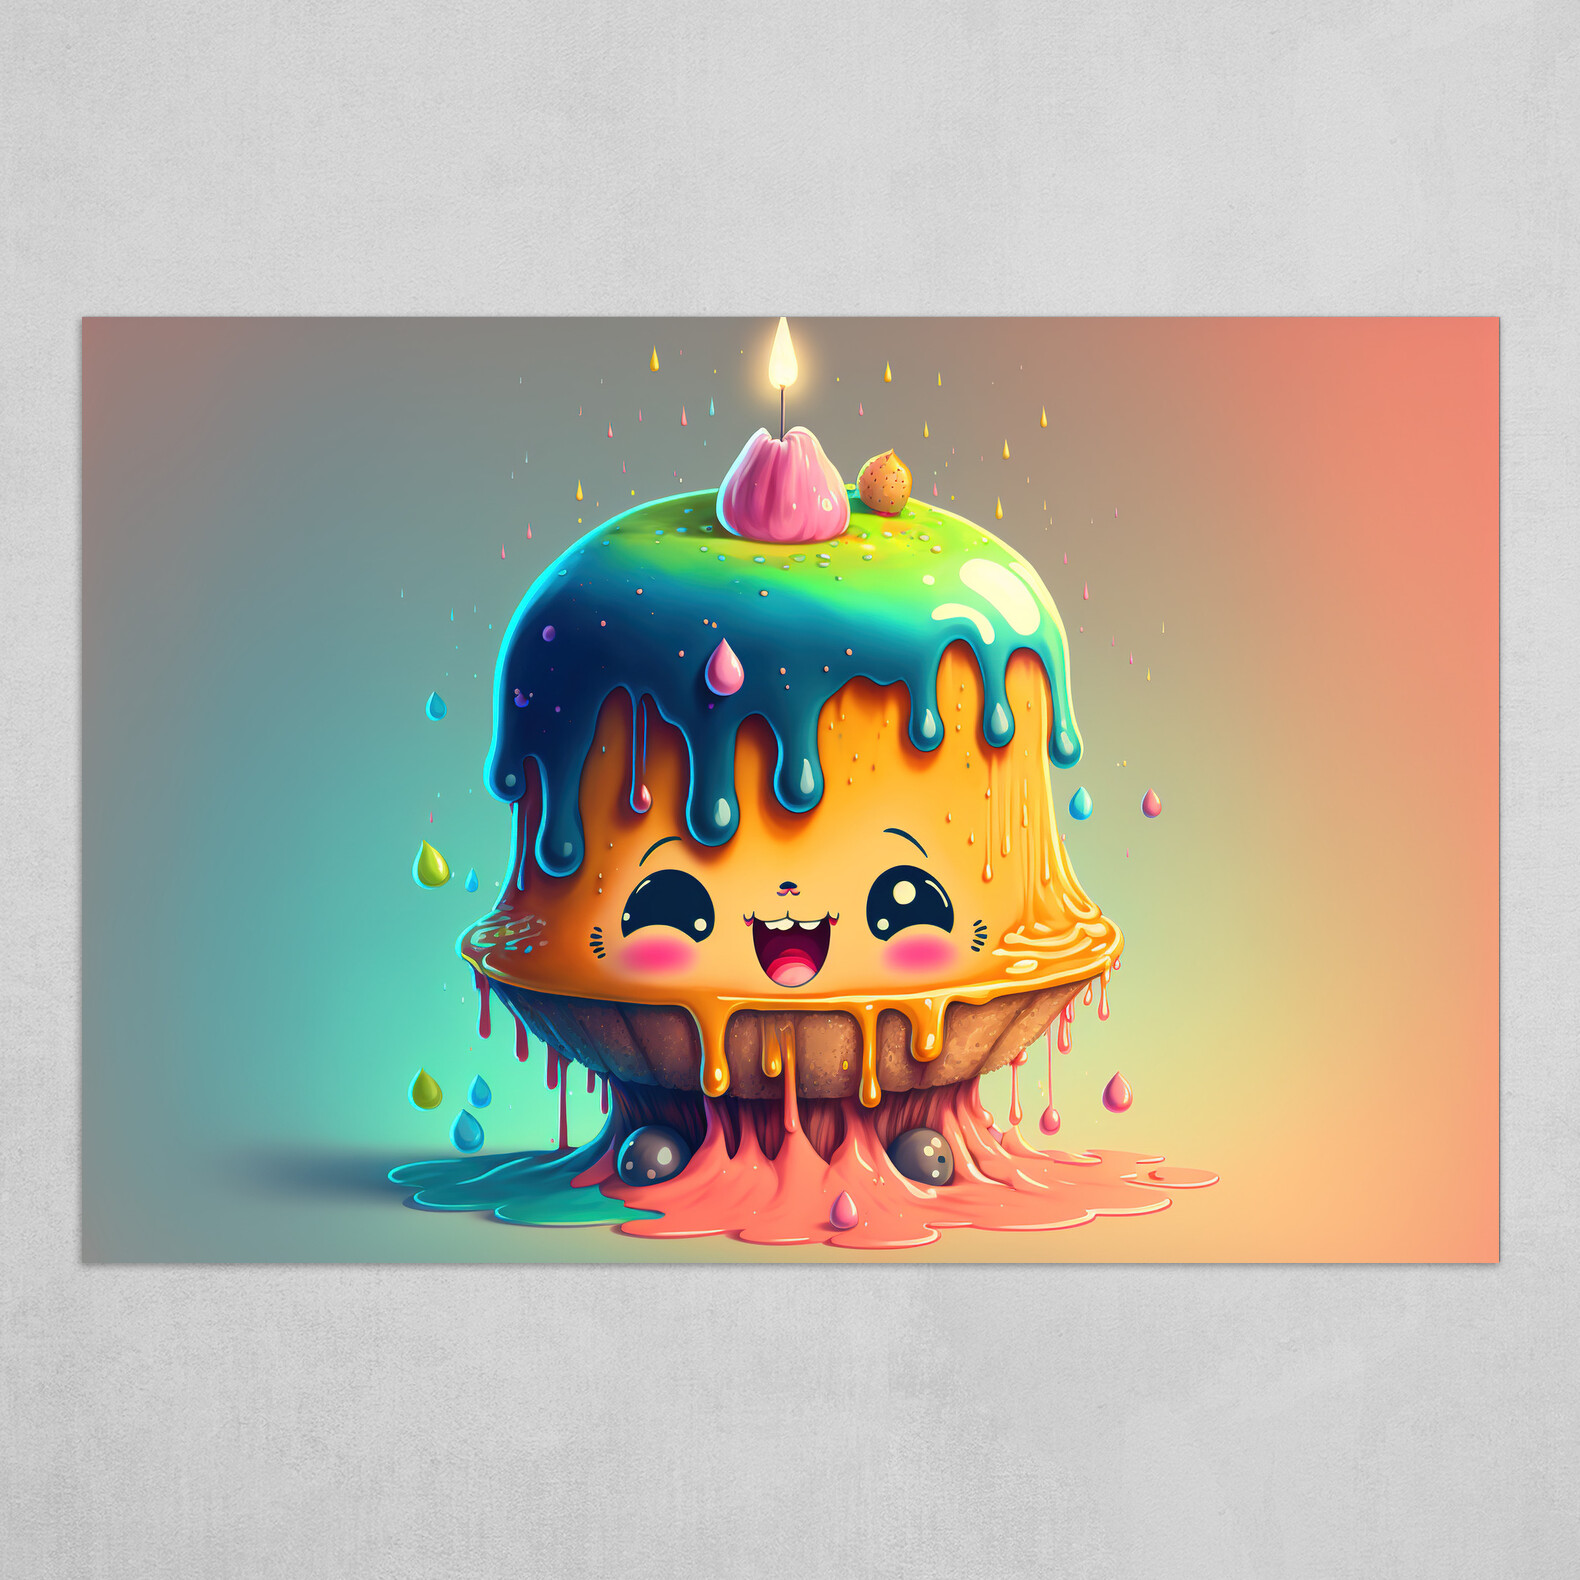 Let them draw cake. – Danny Gregory